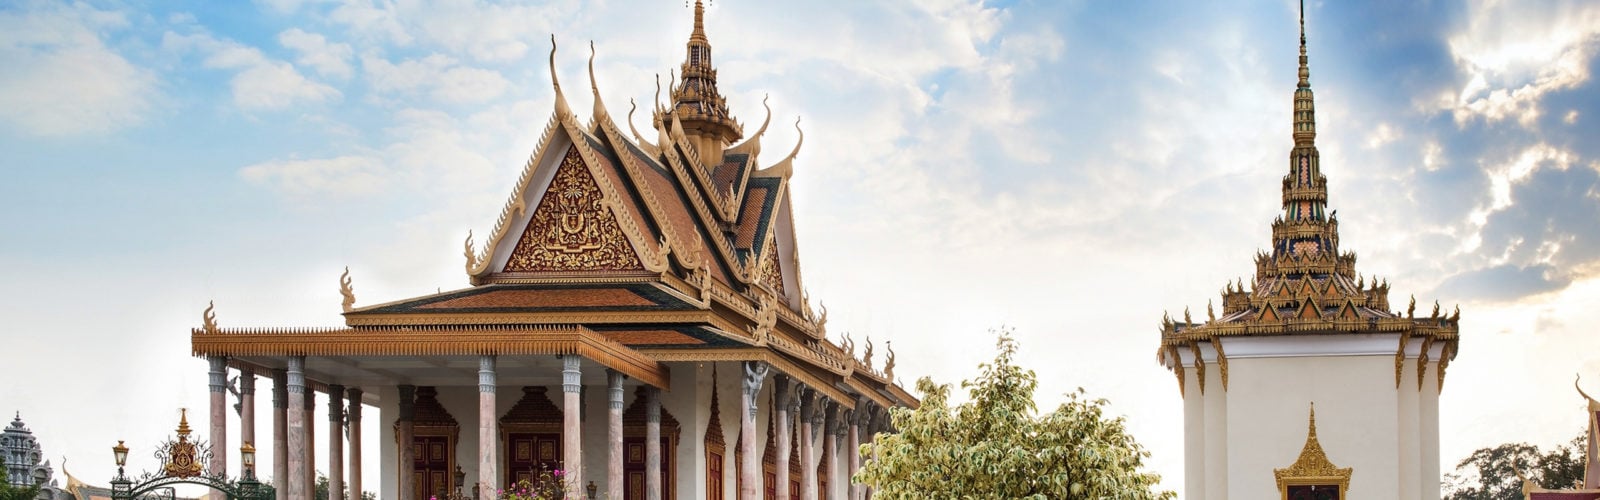 The Silver Pagoda or Wat Preah Keo, Wat Ubosoth Ratanaram or Preah Vihear Preah Keo Morakot is located on the south side of the Royal Palace, Phnom Penh. Silver Pagoda, Royal Palace, Phnom Penh, Attractions in Cambodia.